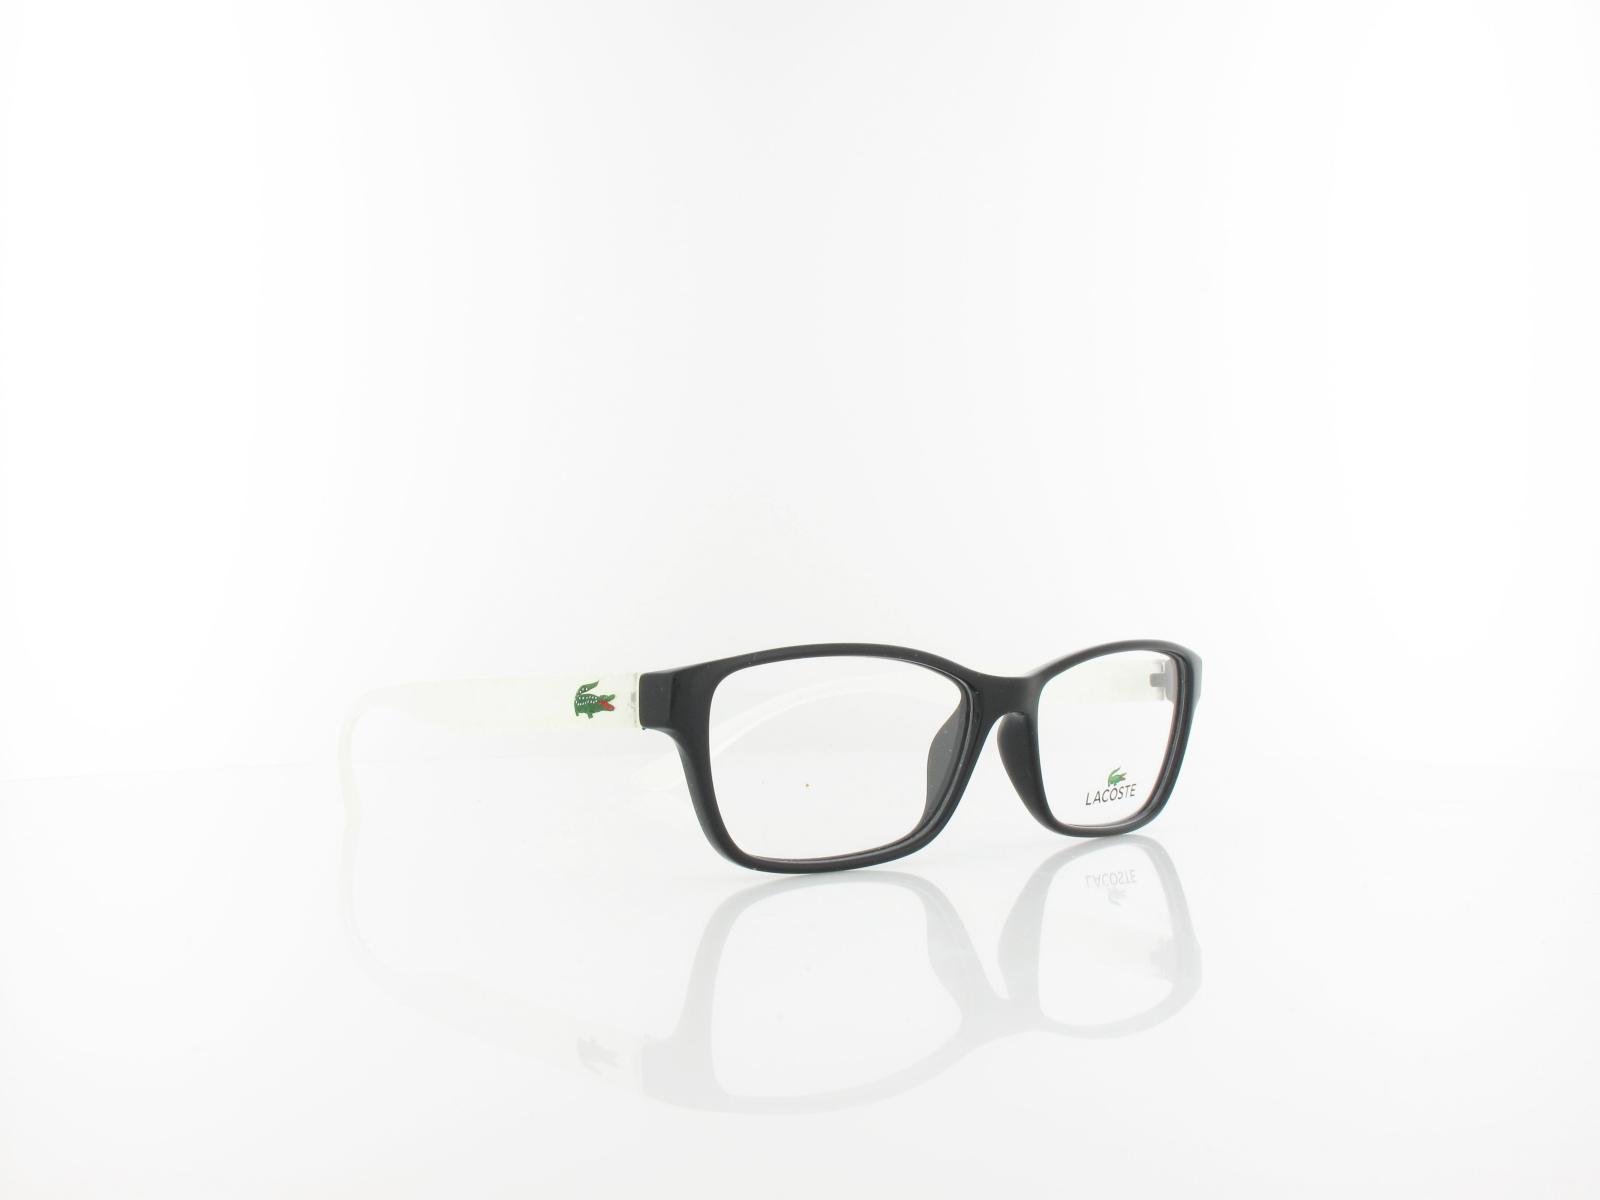 Lacoste | L3803B 002 51 | black with starphospho temples